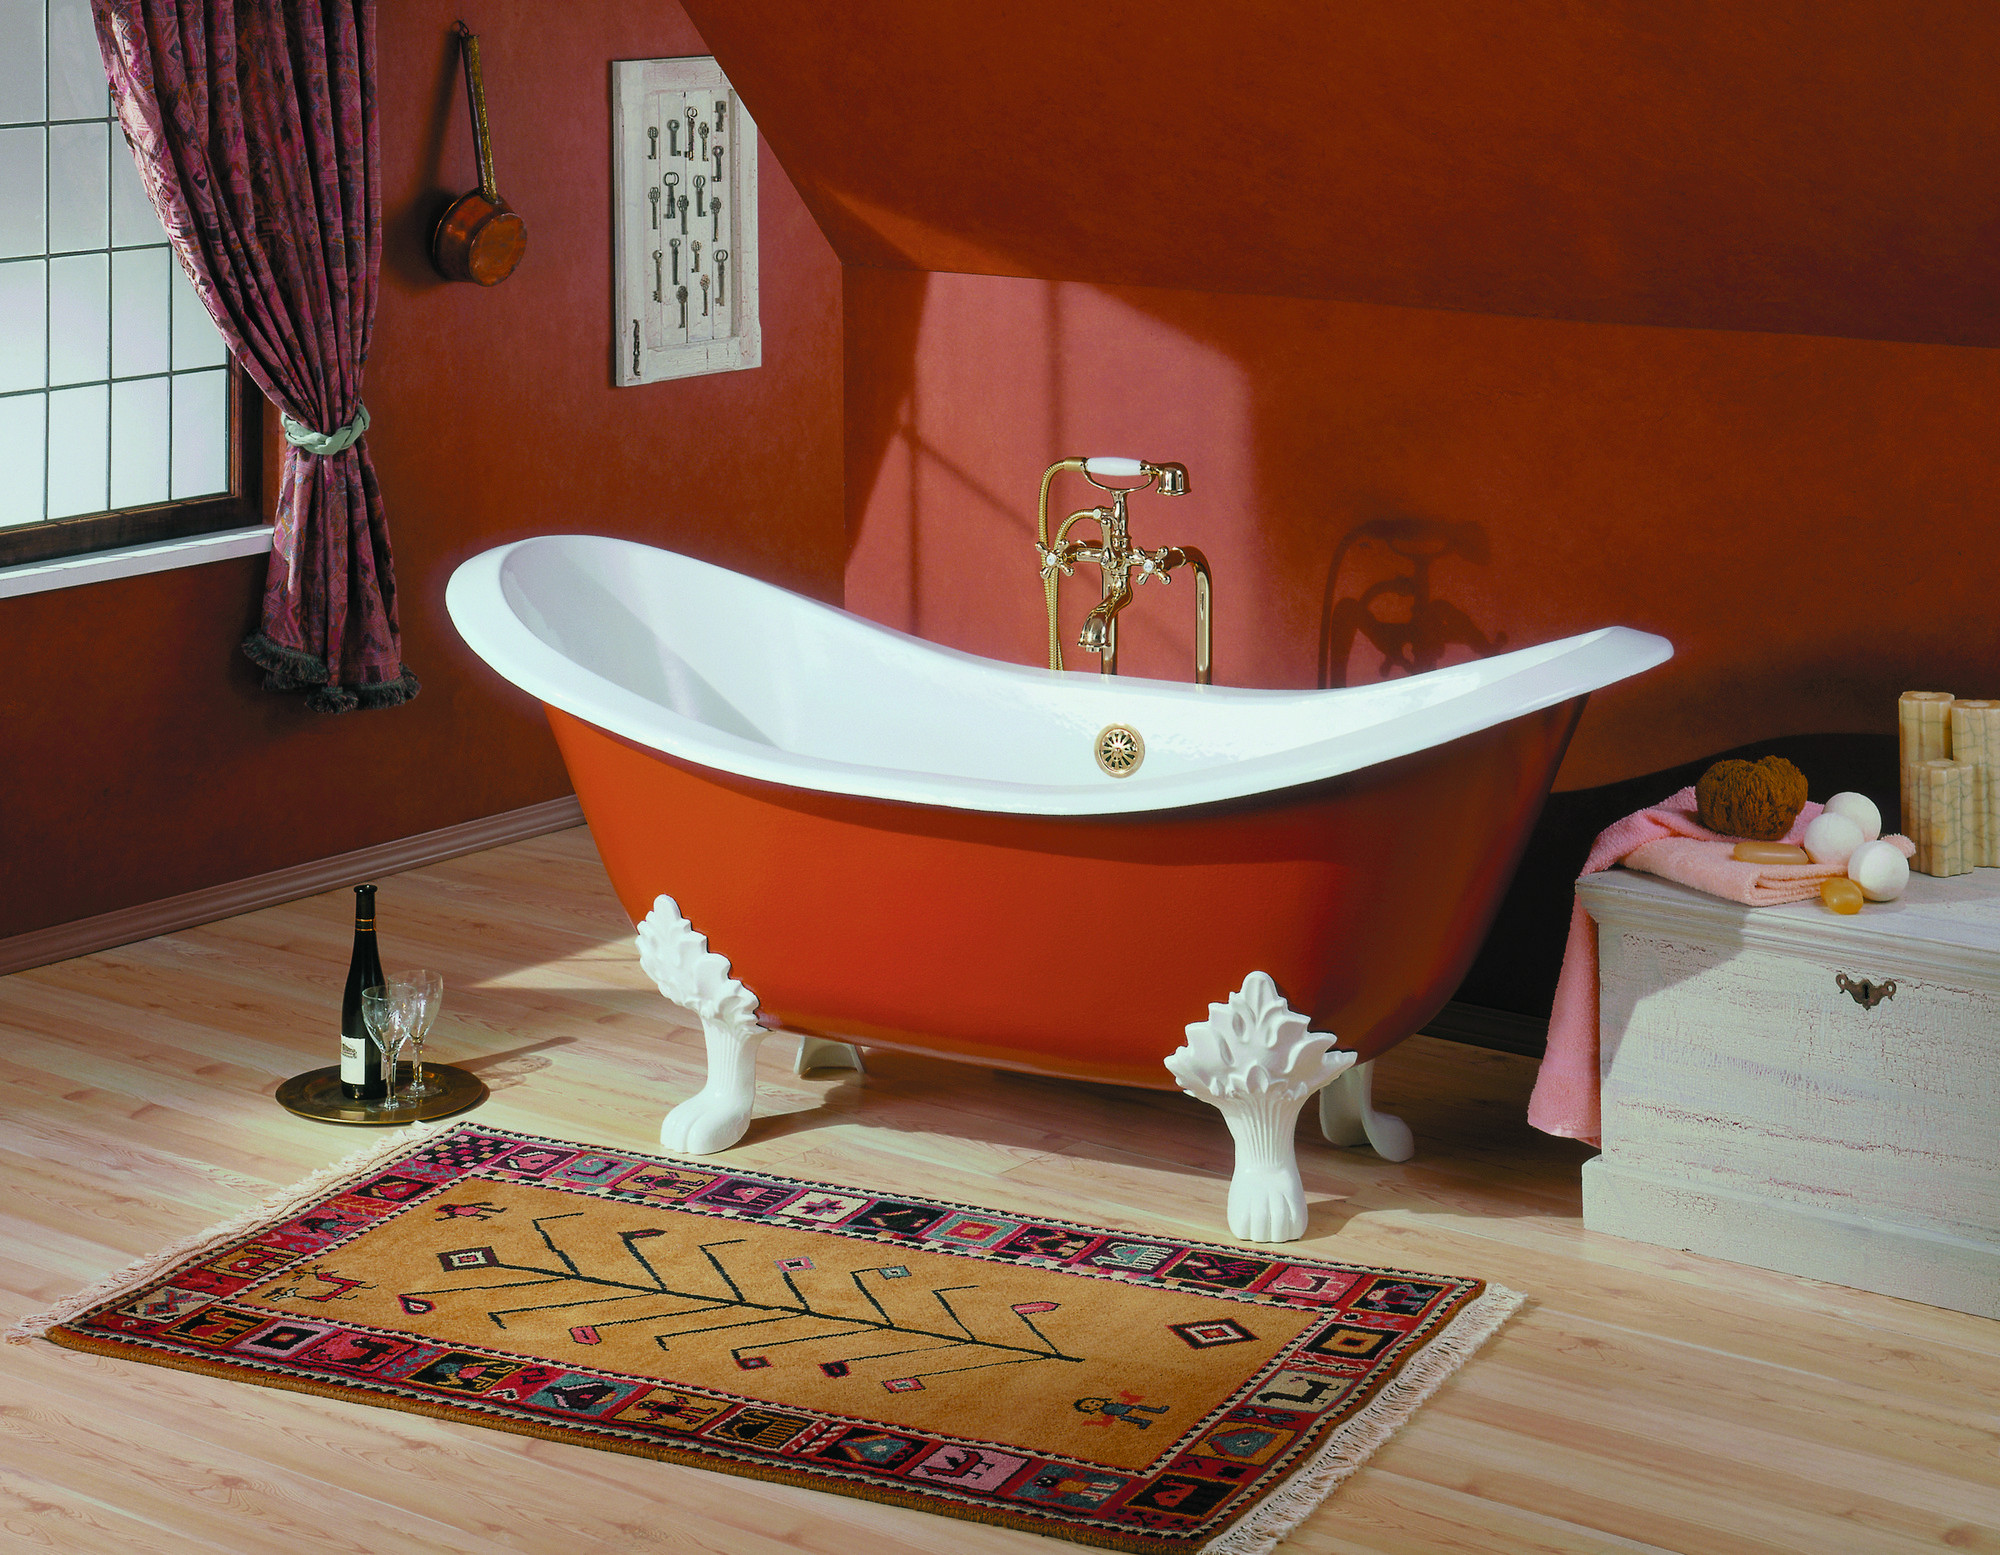 Cheviot 2150-BB-..-7 Regency Biscuit Cast Iron Bathtub with Lion Feet and 7" Drilling Flat Area